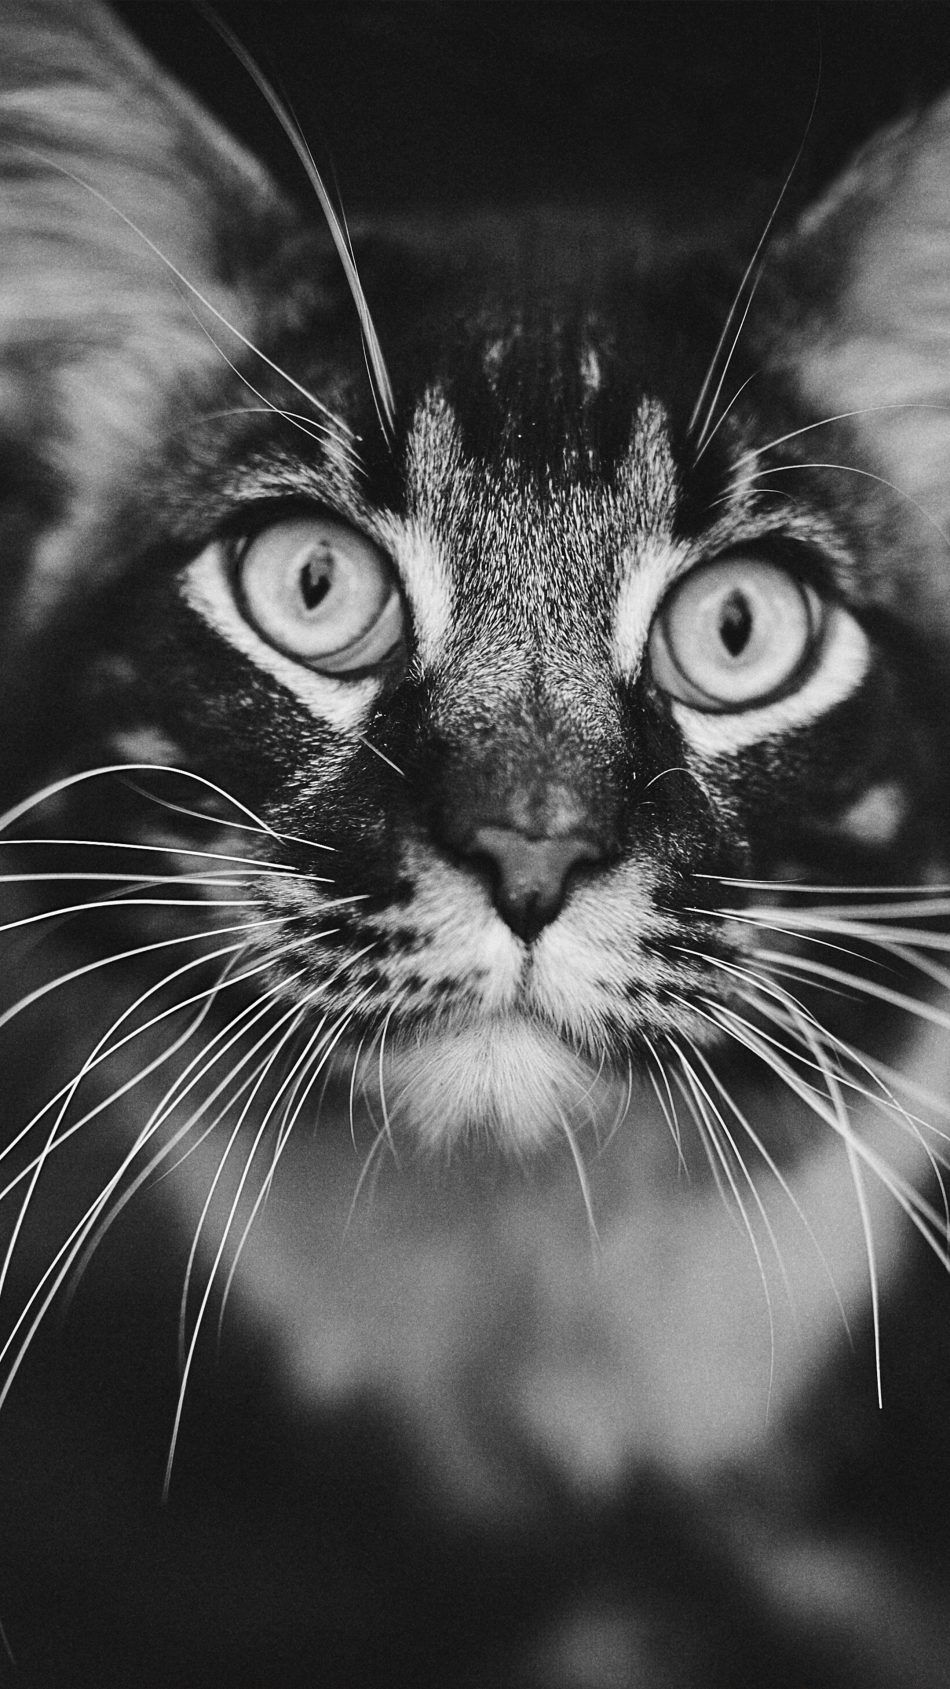 Staring Cat Black & White 4K Ultra HD Mobile Wallpaper. Cats, Cute cat wallpaper, Cats and kittens